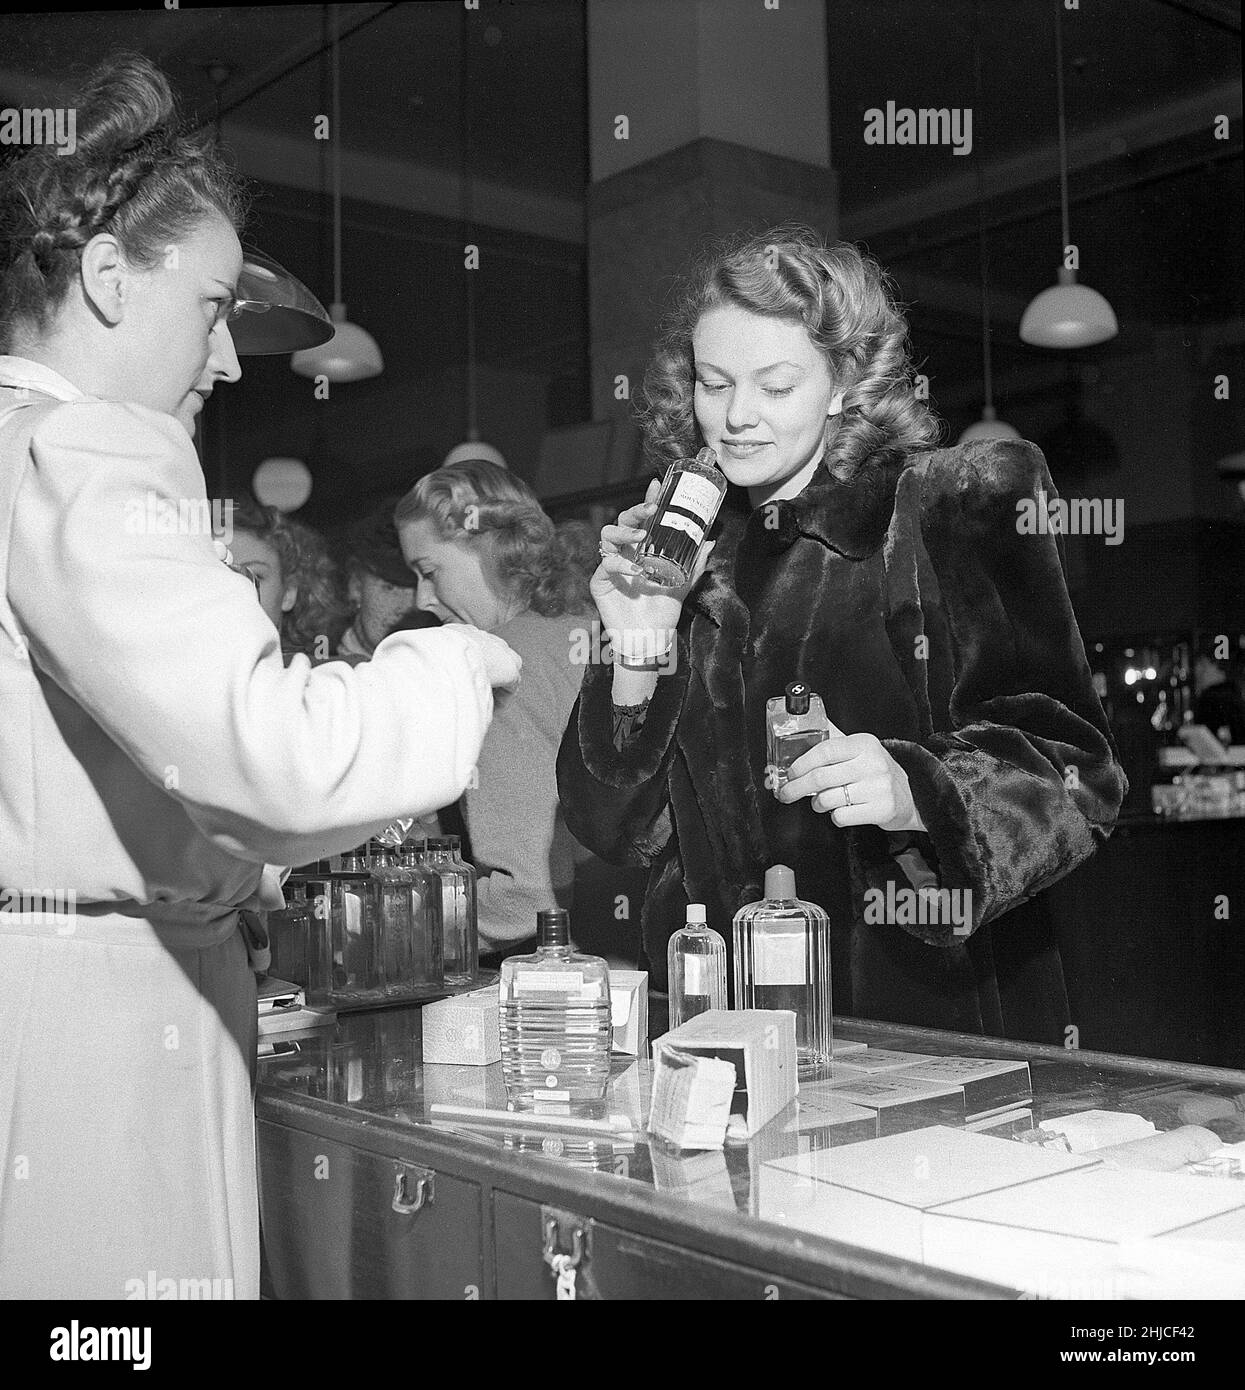 Shopping in the 1940s. A young woman in a perfume store where a sales woman is presenting some of the stores selection of cosmetics and perfumes. On the sales counter products from Peggy Sage is visible. She is Haide Göransson that 1949 was the symbol for the swedish ideal girl and featured on the cover of the magazine Life. She was described having a well-scrubbed Swedish look that was achieved only with soap and water. She was at this time the symbol of the natural look of the nordic women. Sweden 1947 Kristoffersson ref Y71-2 Stock Photo